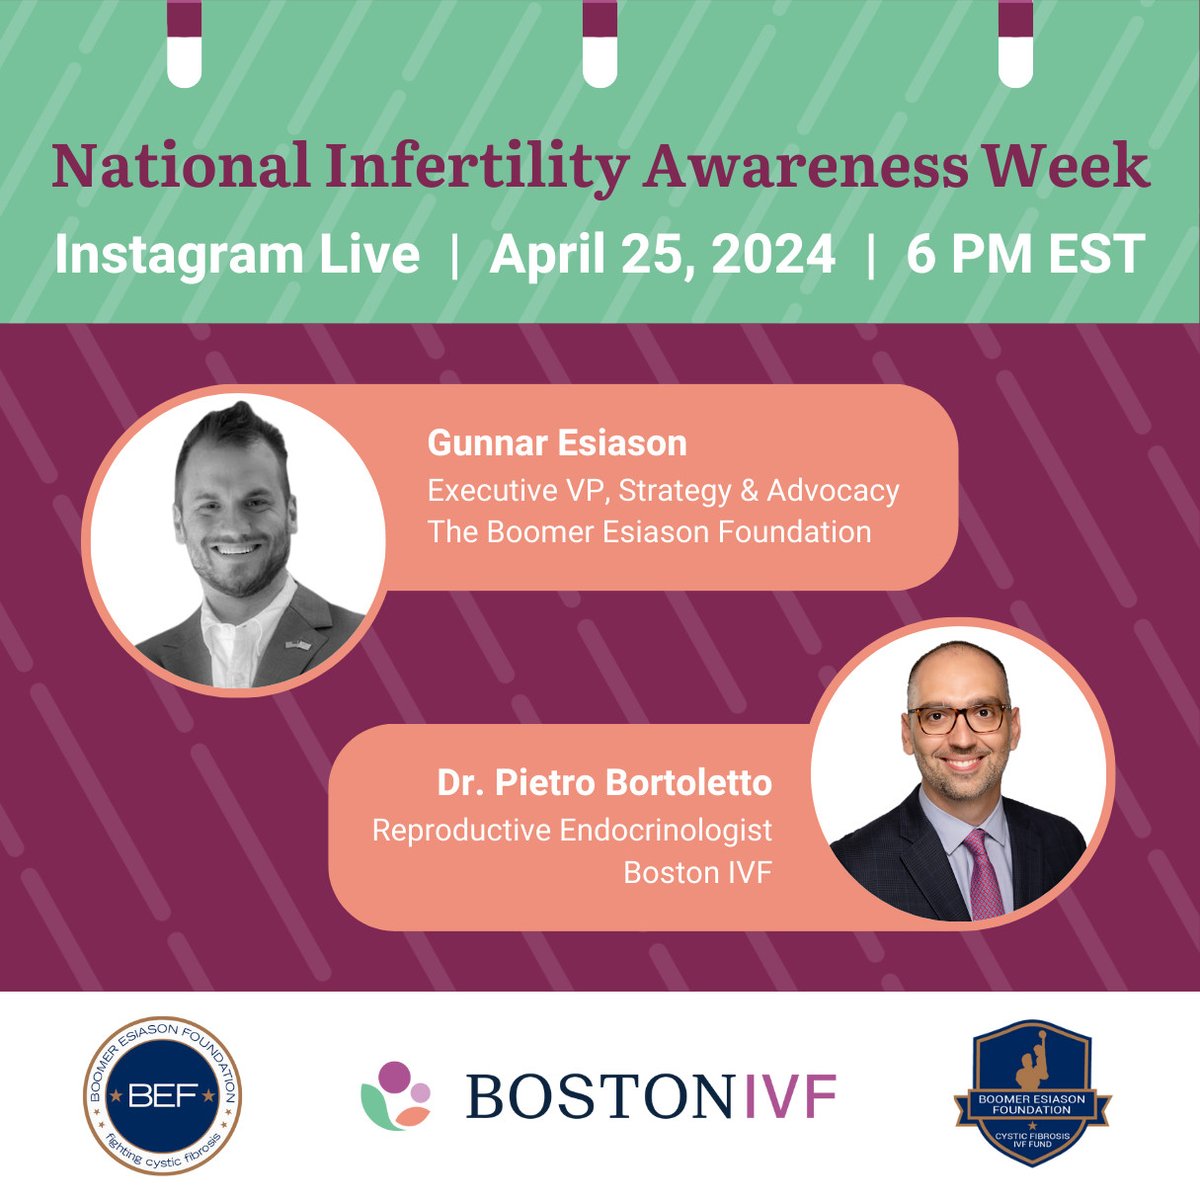 🌟In honor of National Infertility Awareness Week join @G17Esiason of BEF and Dr. Pietro Bortoletto of @BostonIVF tomorrow Thursday, April 25th at 6PM EST for an IG Live. 🌟